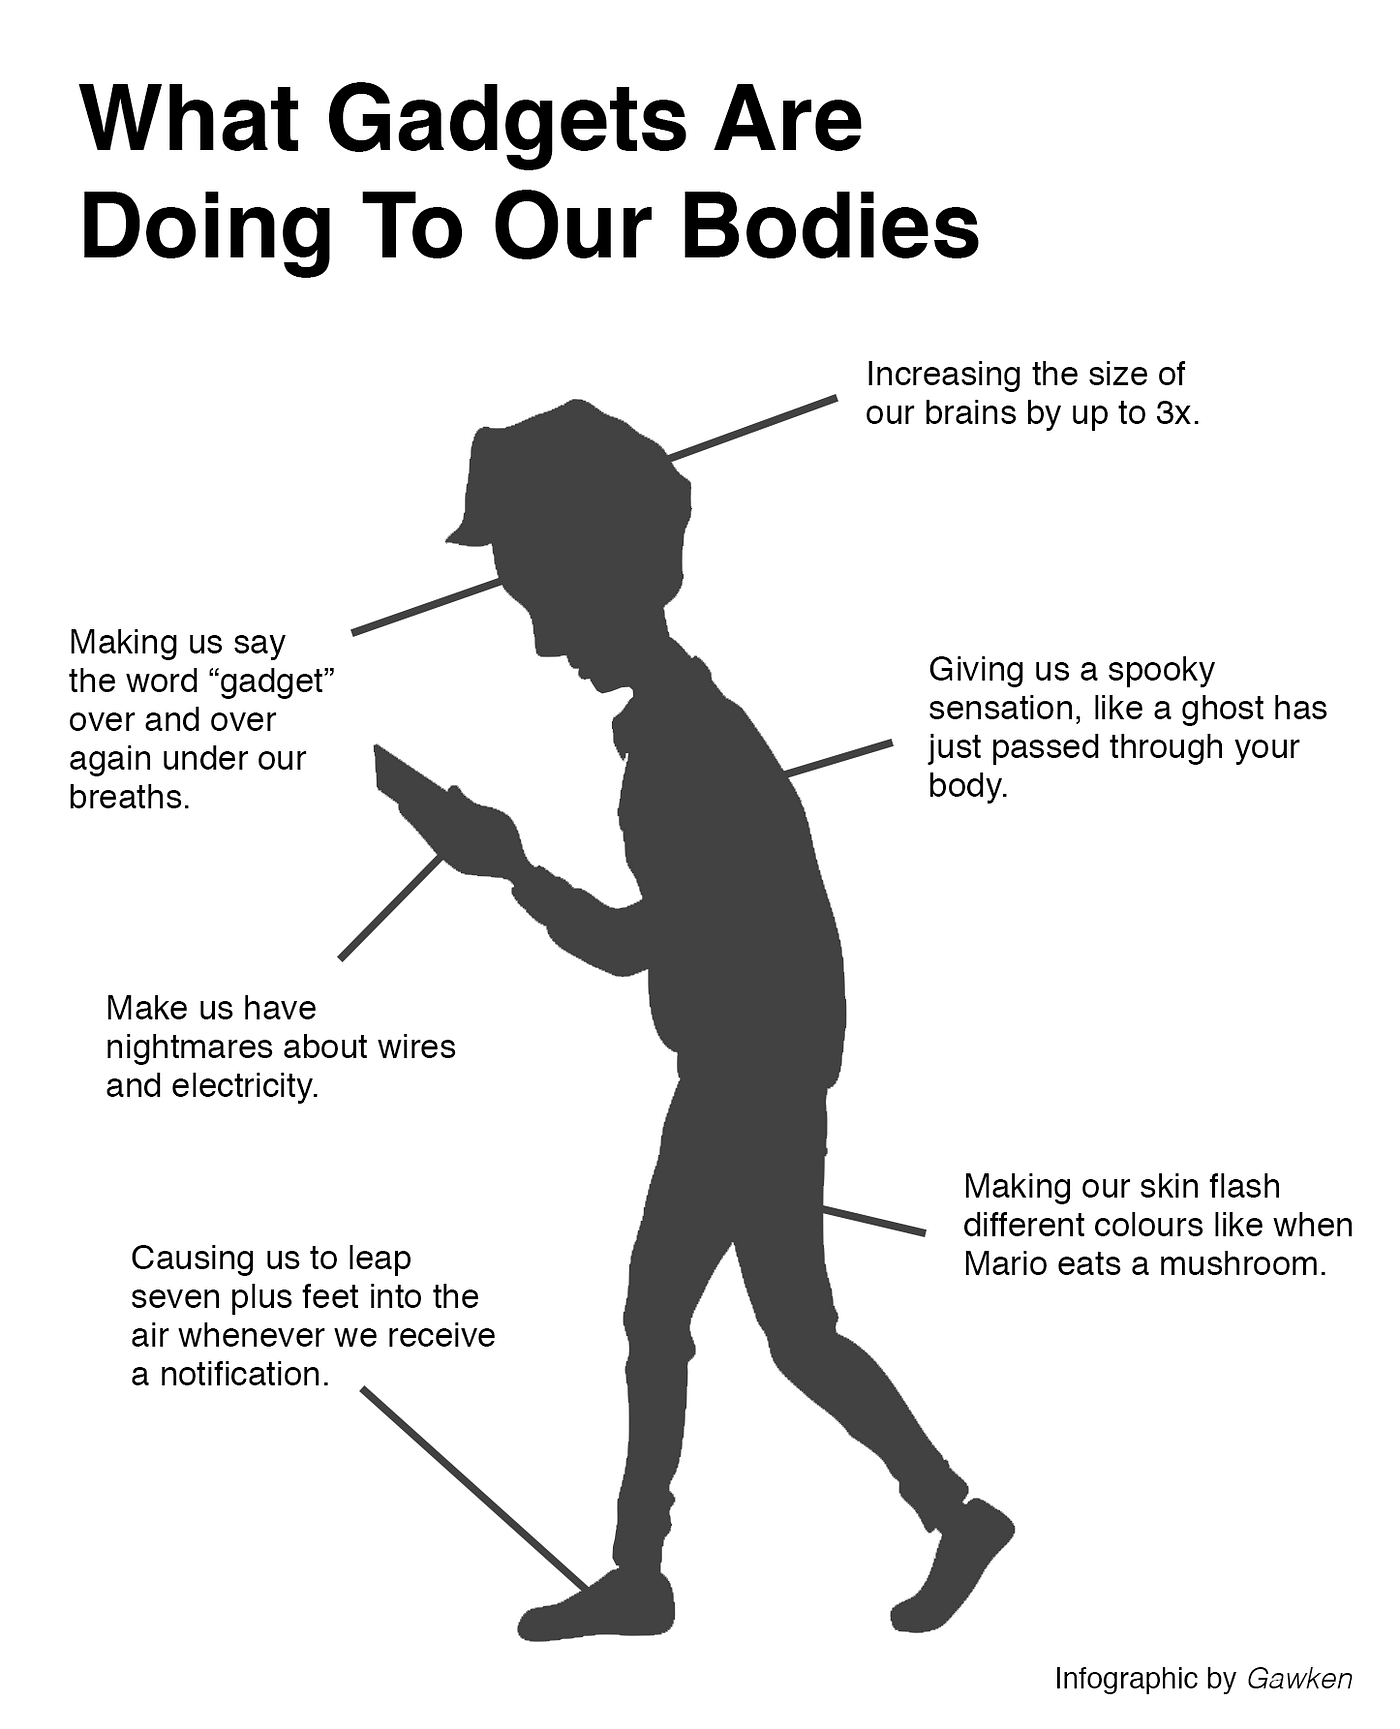 A Handy Thought: Will Gadgets Become Part of Our Bodies?